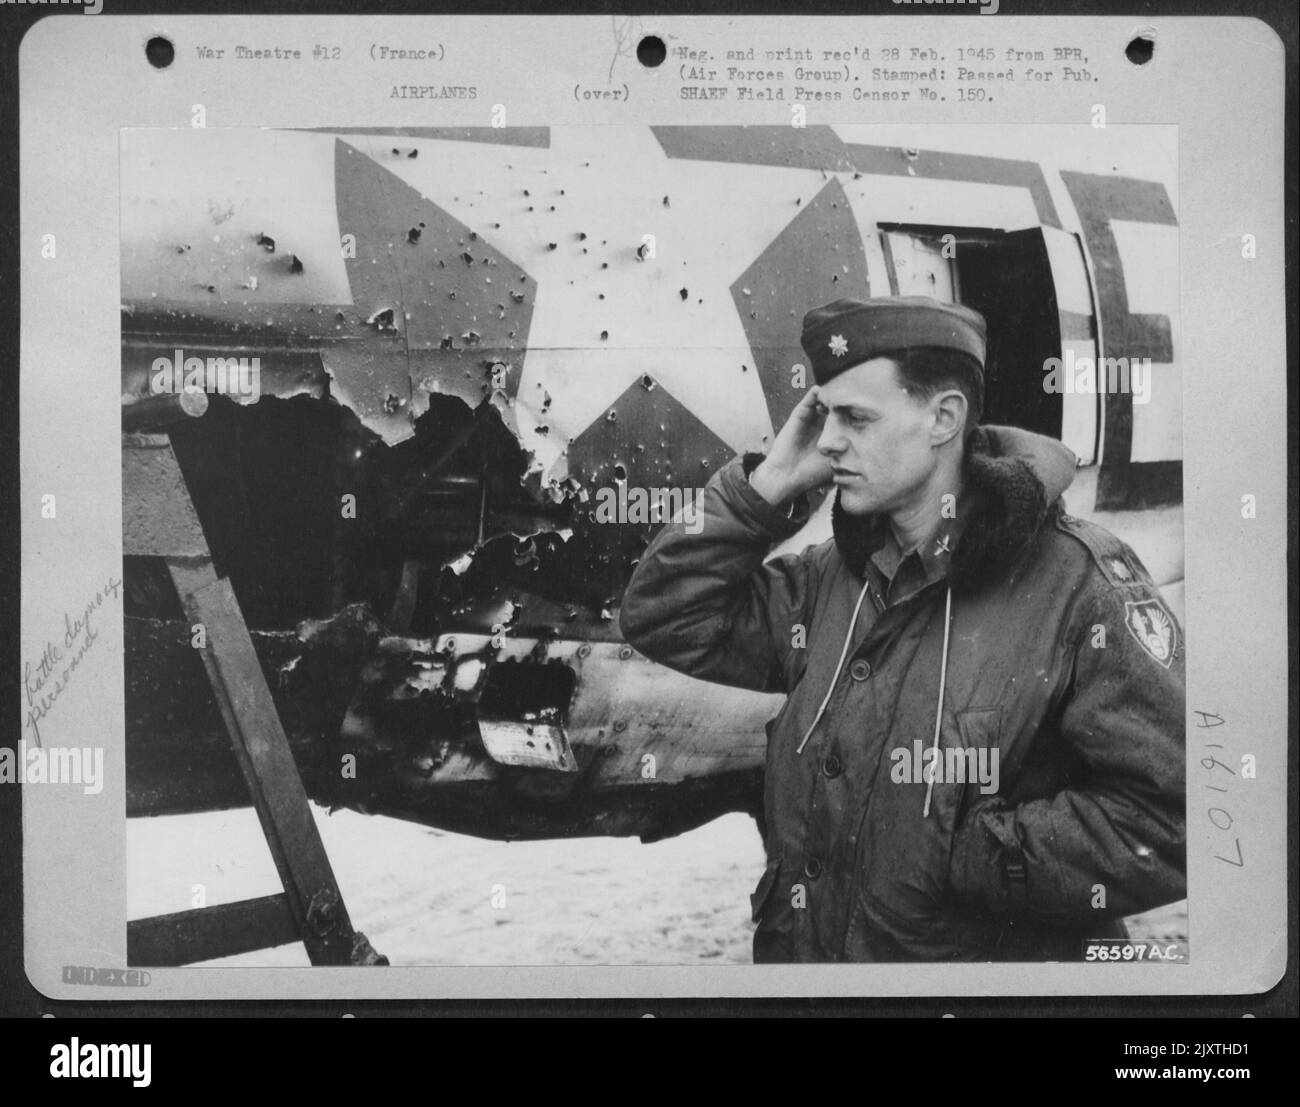 There's a reason for the puzzled expression exhibited by Major Loren W. Herway, Indianola, Iowa, shown examing the damage inflicted on his 9th Air force P-47 Thunderbolt by a direct hit from 88 mm. flak. He's still wondering how the P-47, with Stock Photo